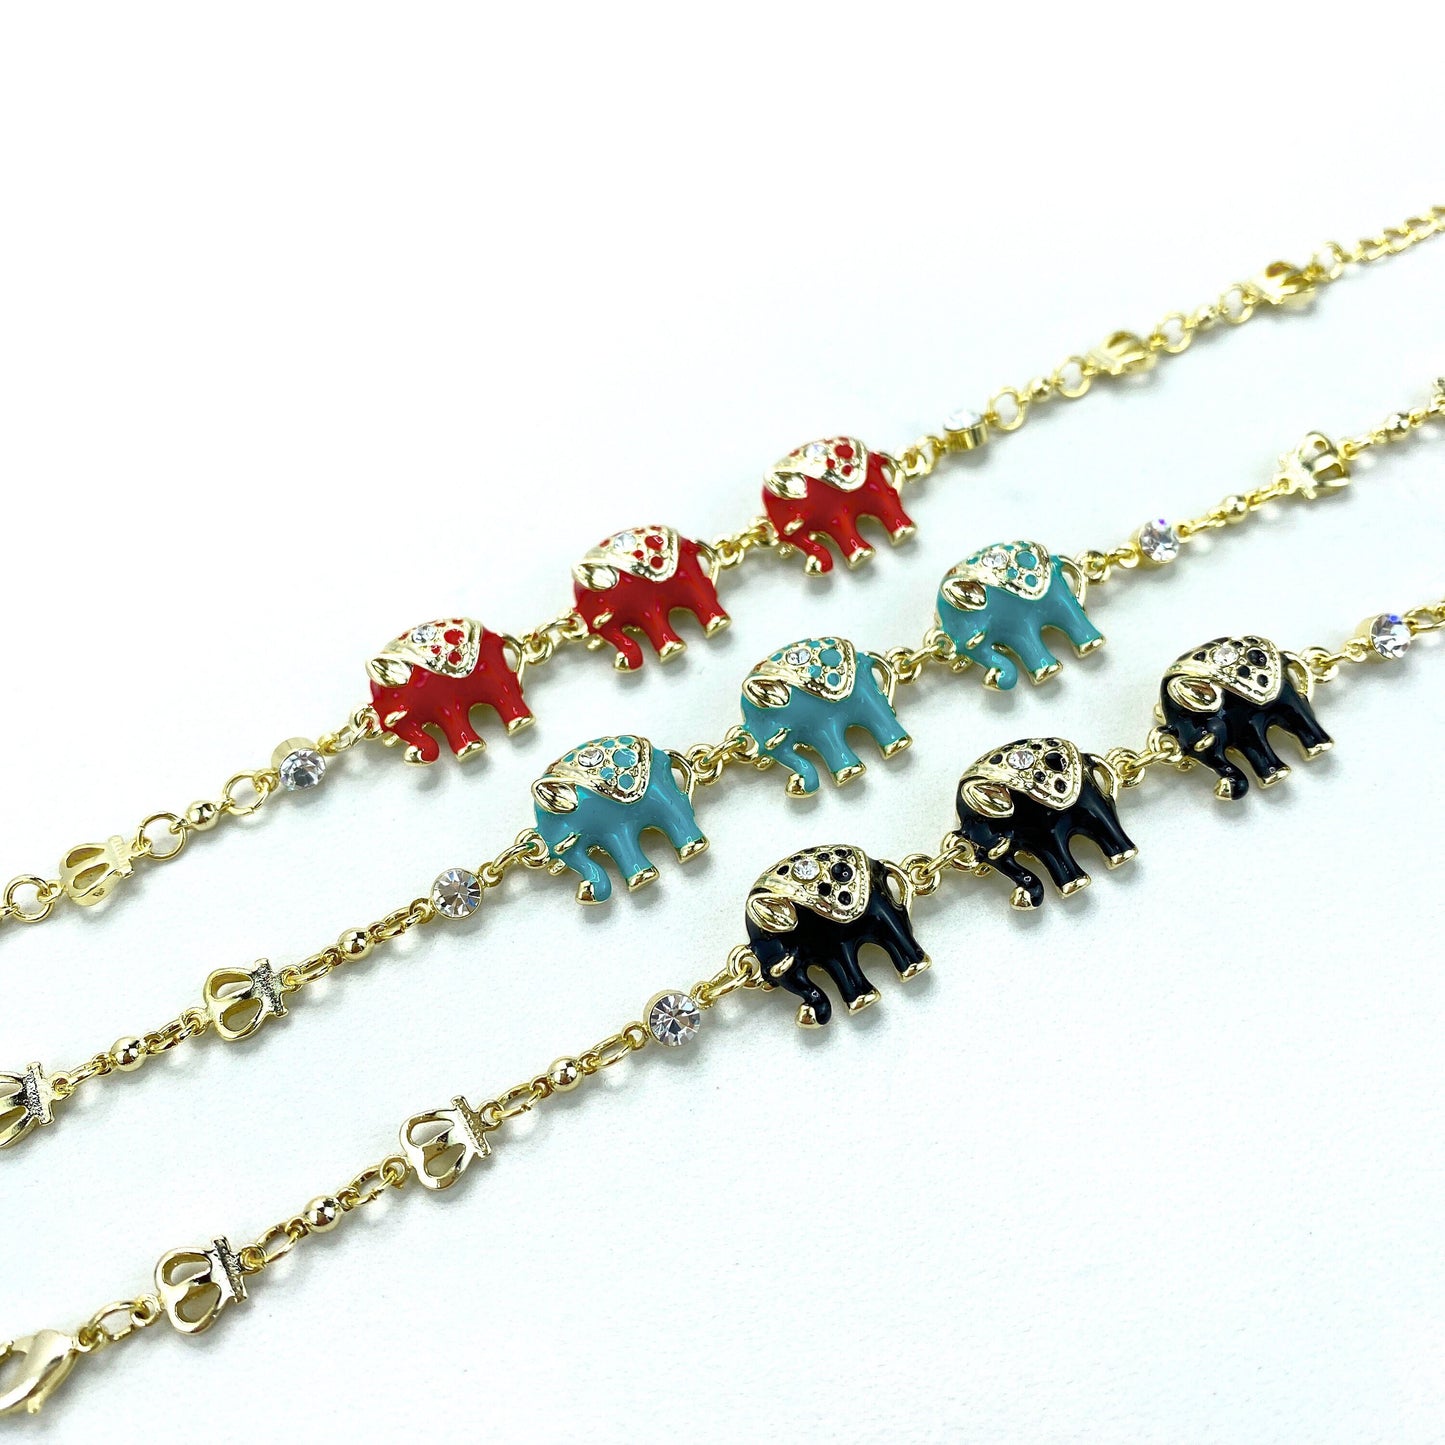 18k Gold Filled Cubic Zirconia and Mini Crown Details and Elephants Charm in Red, Blue or Black Bracelet Wholesale Jewelry Supplies